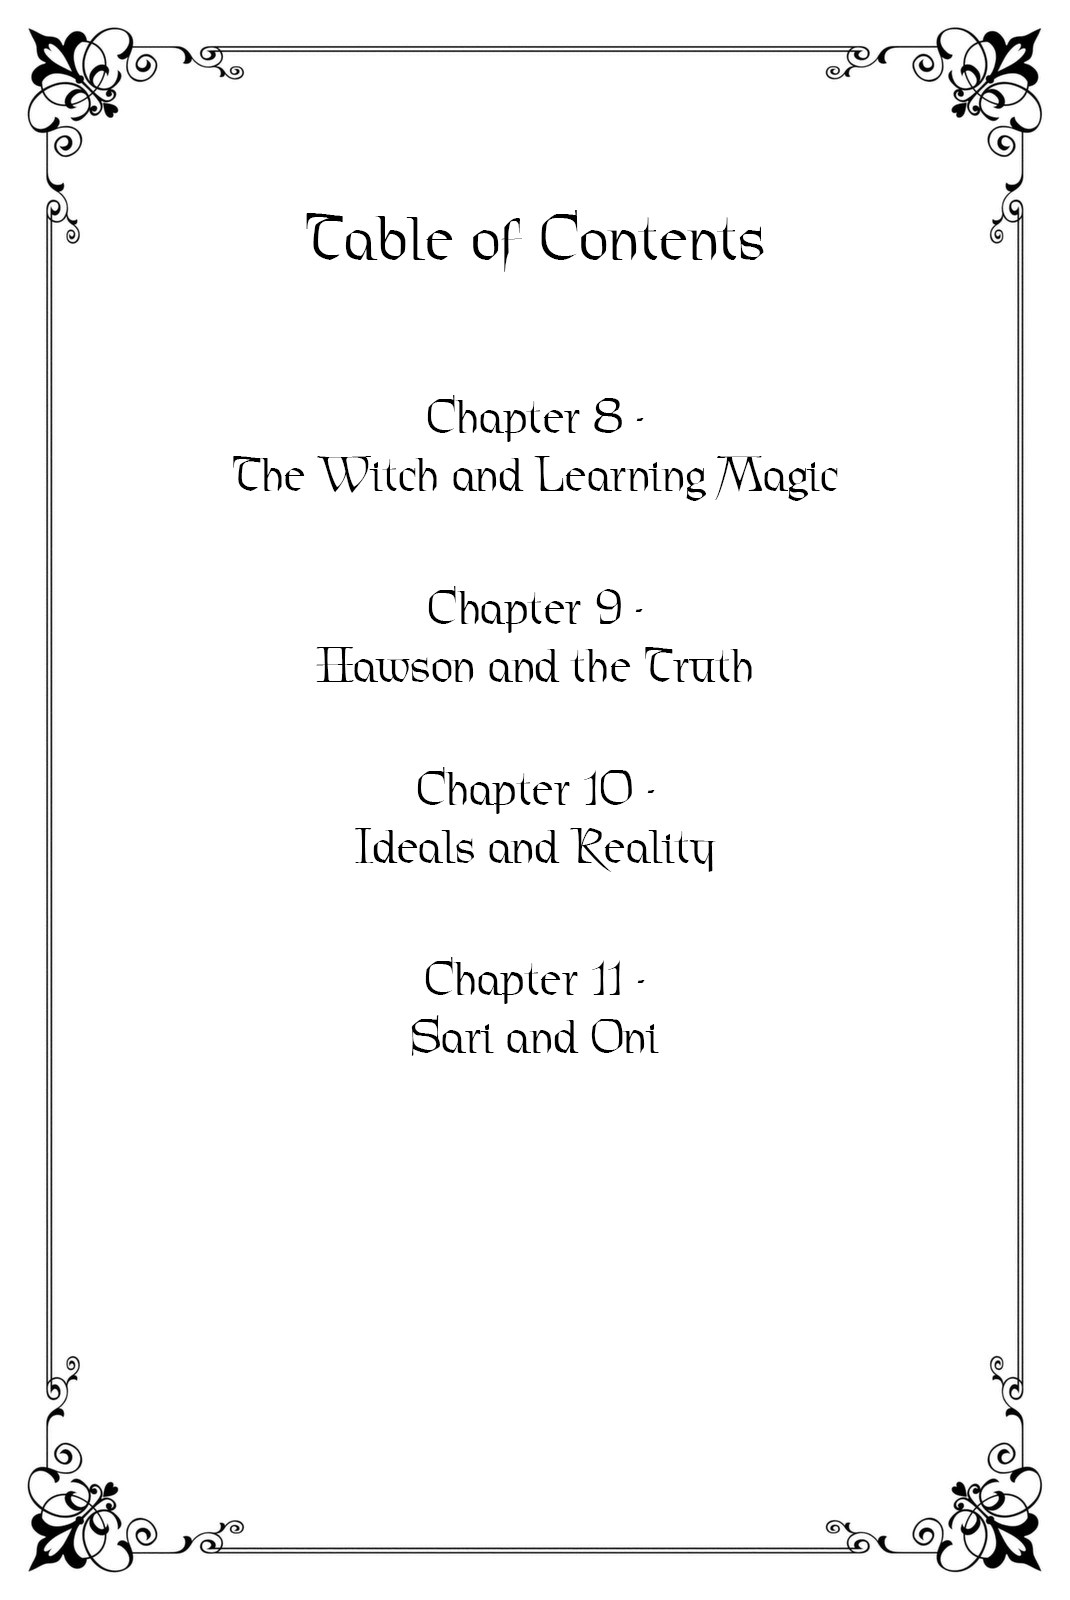 Peach Boy Riverside Vol. 3 Ch. 8 The Witch and Learning Magic